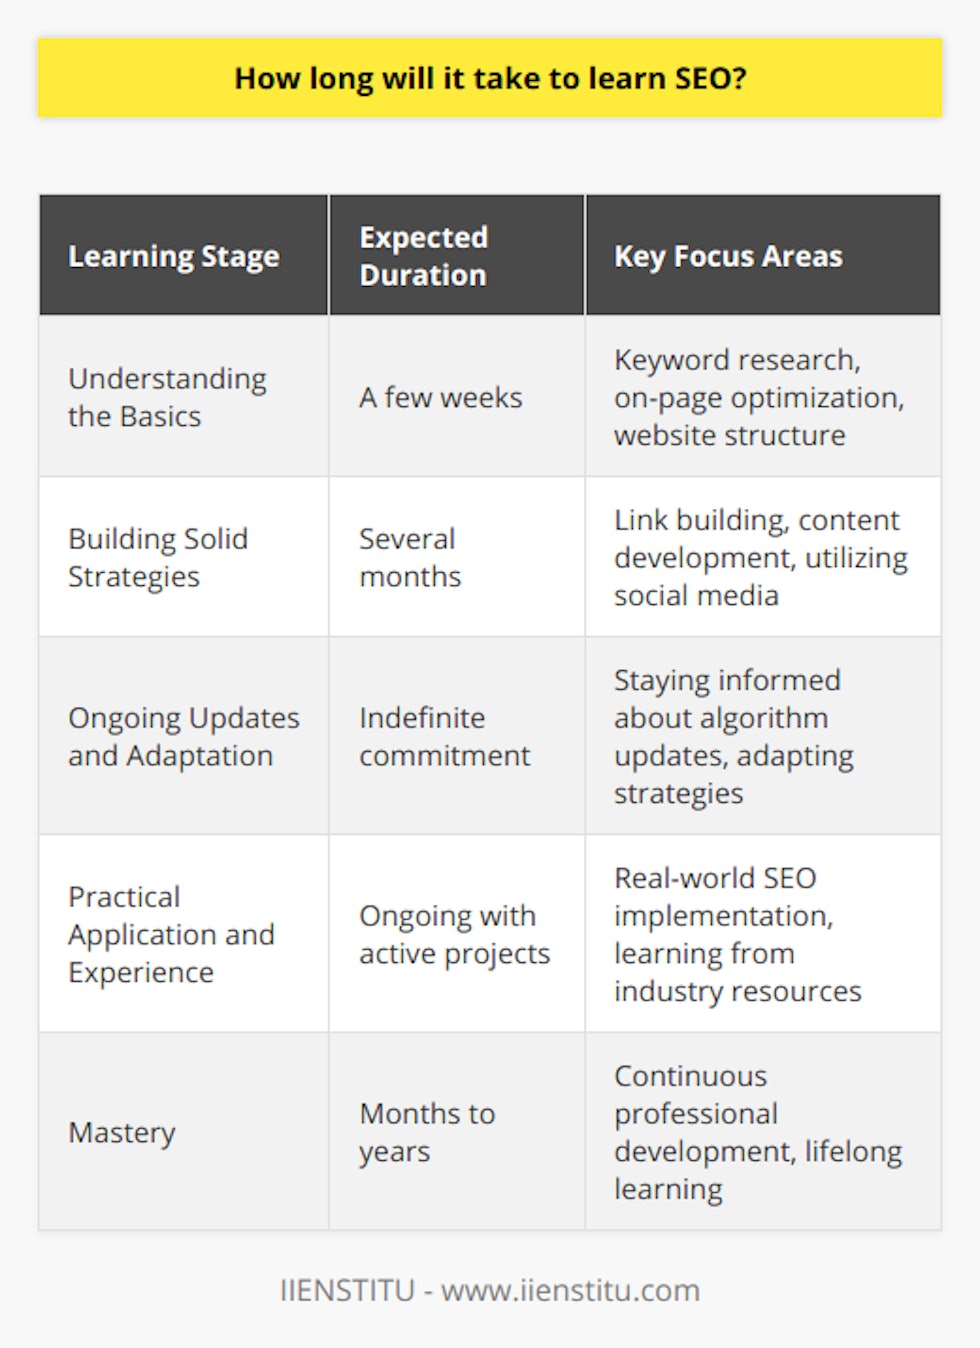 Learning SEO is an ongoing journey, rather than a destination. Given the dynamic nature of search engines and digital behavior, the timeframe to learn SEO effectively is not set in stone. Here's a breakdown of what you can expect through the learning process:Understanding the Basics:Initial comprehension of SEO involves familiarization with key concepts such as keyword research, on-page optimization techniques (like meta tags, headings, and site speed optimization), and the structure of a well-optimized website. Individuals with prior experience in digital marketing or website management can typically grasp these basics within a few weeks, as they already understand the internet's framework.Building Solid Strategies:Diving deeper involves strategizing how to employ SEO effectively. This can take several months, as it requires a solid understanding of more complex concepts, such as creating inbound and outbound link building strategies, content development practices aimed at enhancing SEO, and leveraging social media to influence search engine rankings. This phase involves keeping track of rankings, analyzing the effectiveness of different SEO tactics, and adjusting methods based on results.Ongoing Updates and Adaptation:Search engines like Google constantly update their algorithms to improve user experience. A serious SEO learner must stay informed about these updates and adapt strategies accordingly. This is an indefinite commitment, meaning that anyone interested in mastering SEO must accept lifelong learning as part of their professional development.Practical Application and Experience:Theory is important, but SEO is best learned through doing. Applying concepts to real-world scenarios—such as optimizing actual websites and tracking the resulting changes in search engine rankings—is crucial. This hands-on experience should be paired with a routine of learning from case studies, industry blogs, webinars, and comprehensive courses, such as those offered by IIENSTITU, which can provide structured and up-to-date training in SEO practices.To summarize, while one can learn the fundamentals of SEO within a few weeks, developing into a proficient SEO strategist is an iterative process that typically spans months to years. Mastery is an ongoing pursuit, with time and experience being the most significant factors impacting how quickly one becomes adept in search engine optimization.